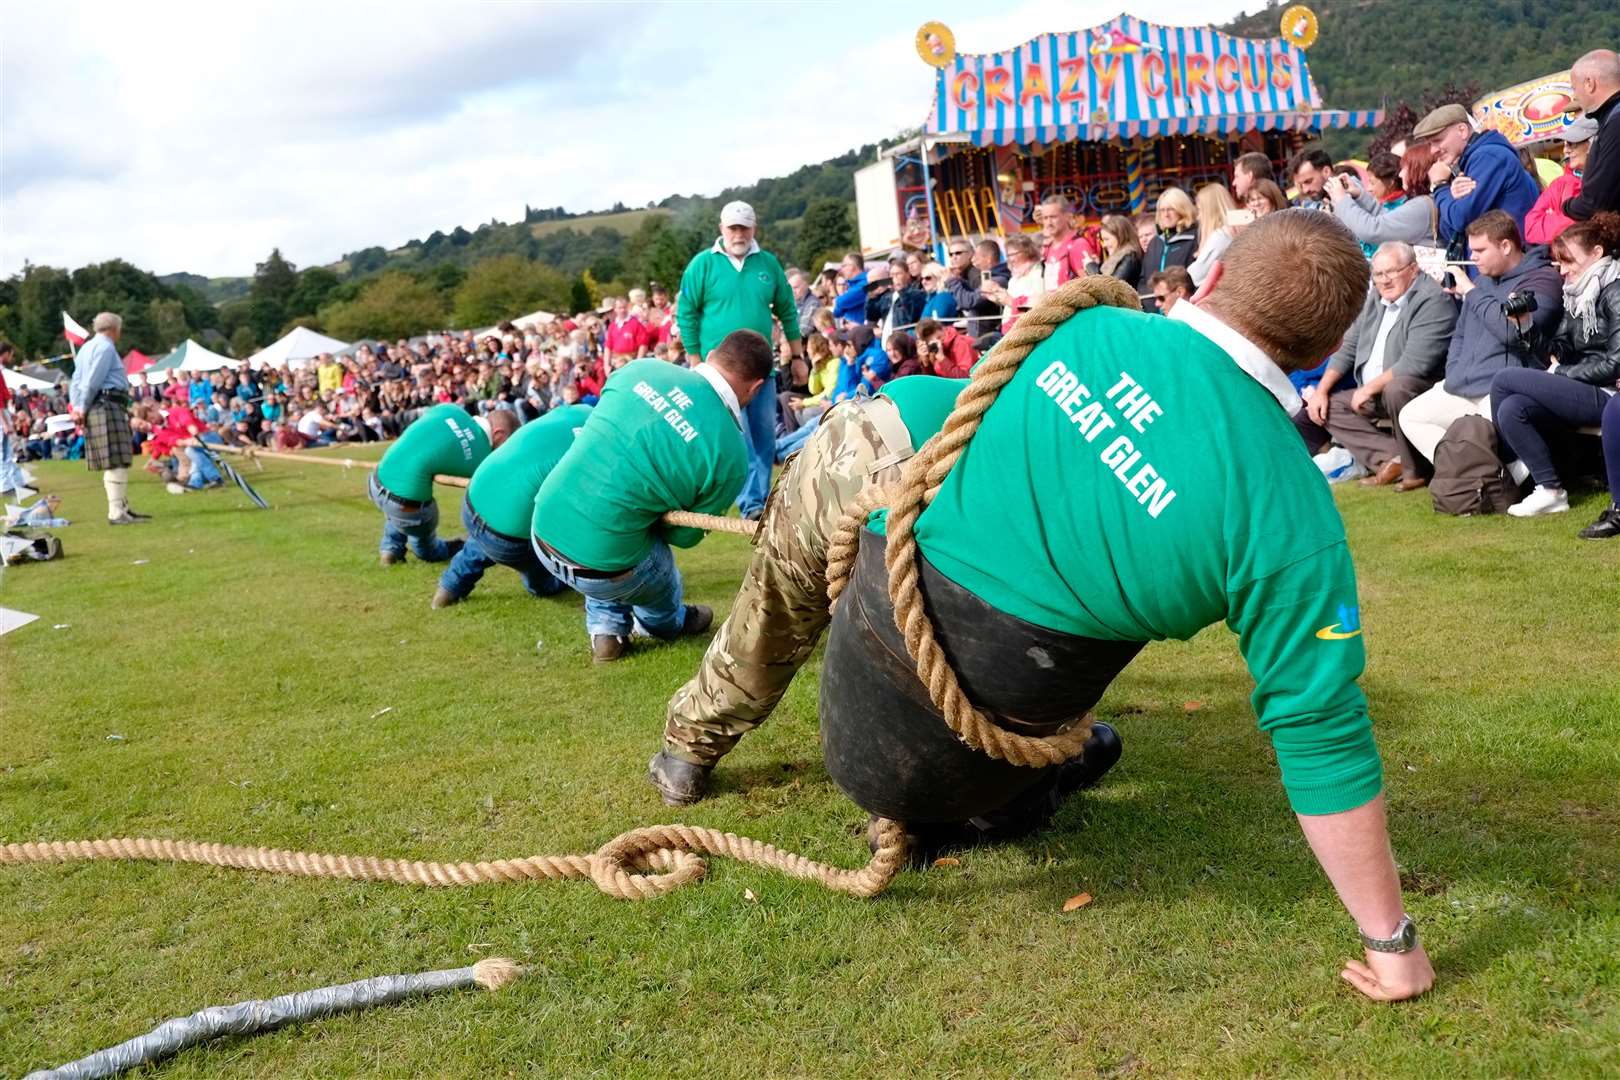 The tug of war is hotly contested. Picture: Chris Smith